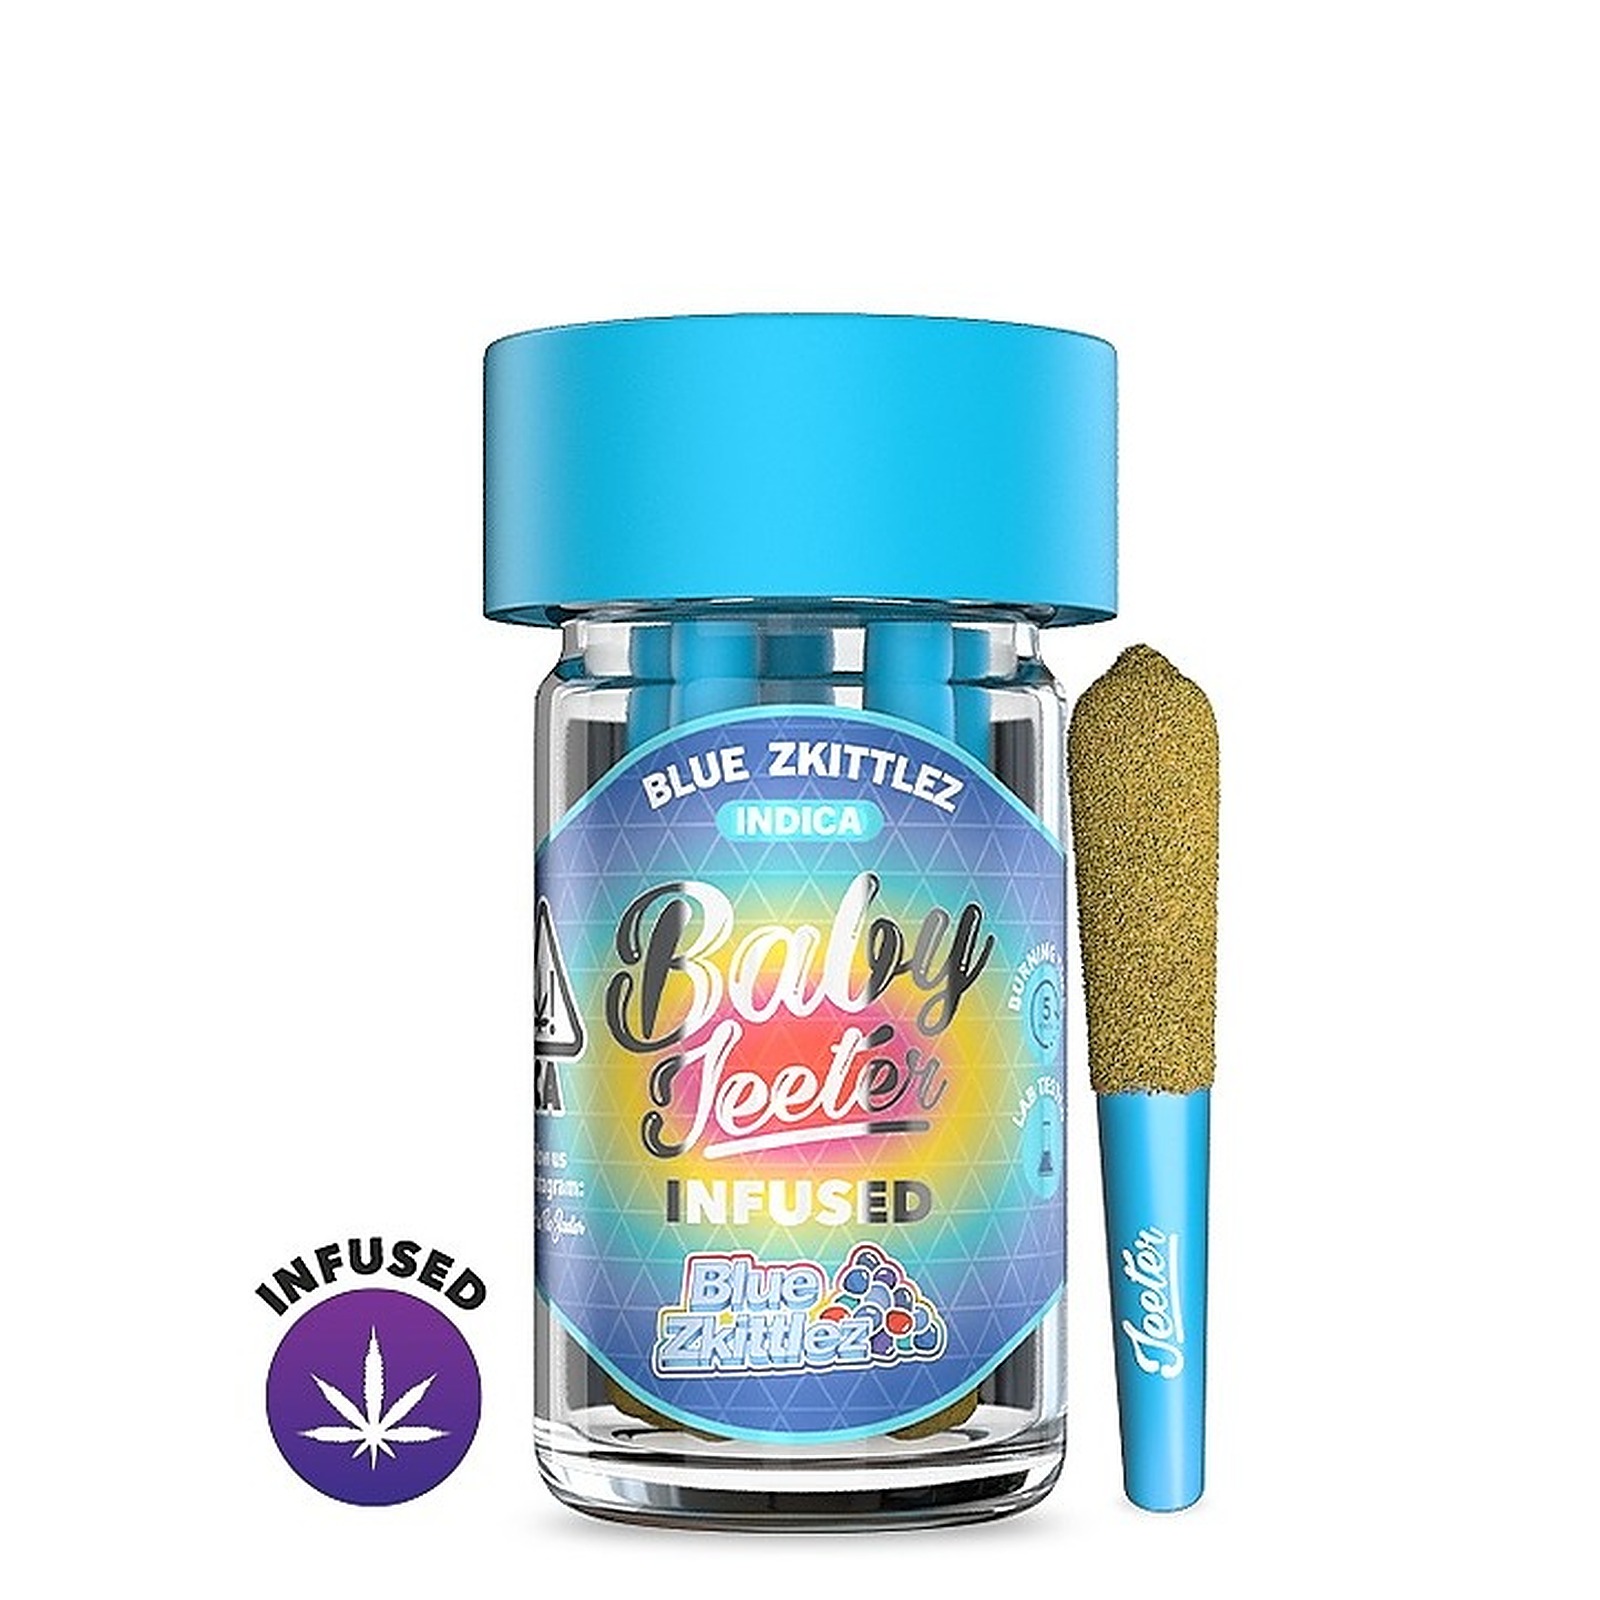 Blue Zkittlez Infused Baby Jeeter 5 Pack 2.5G